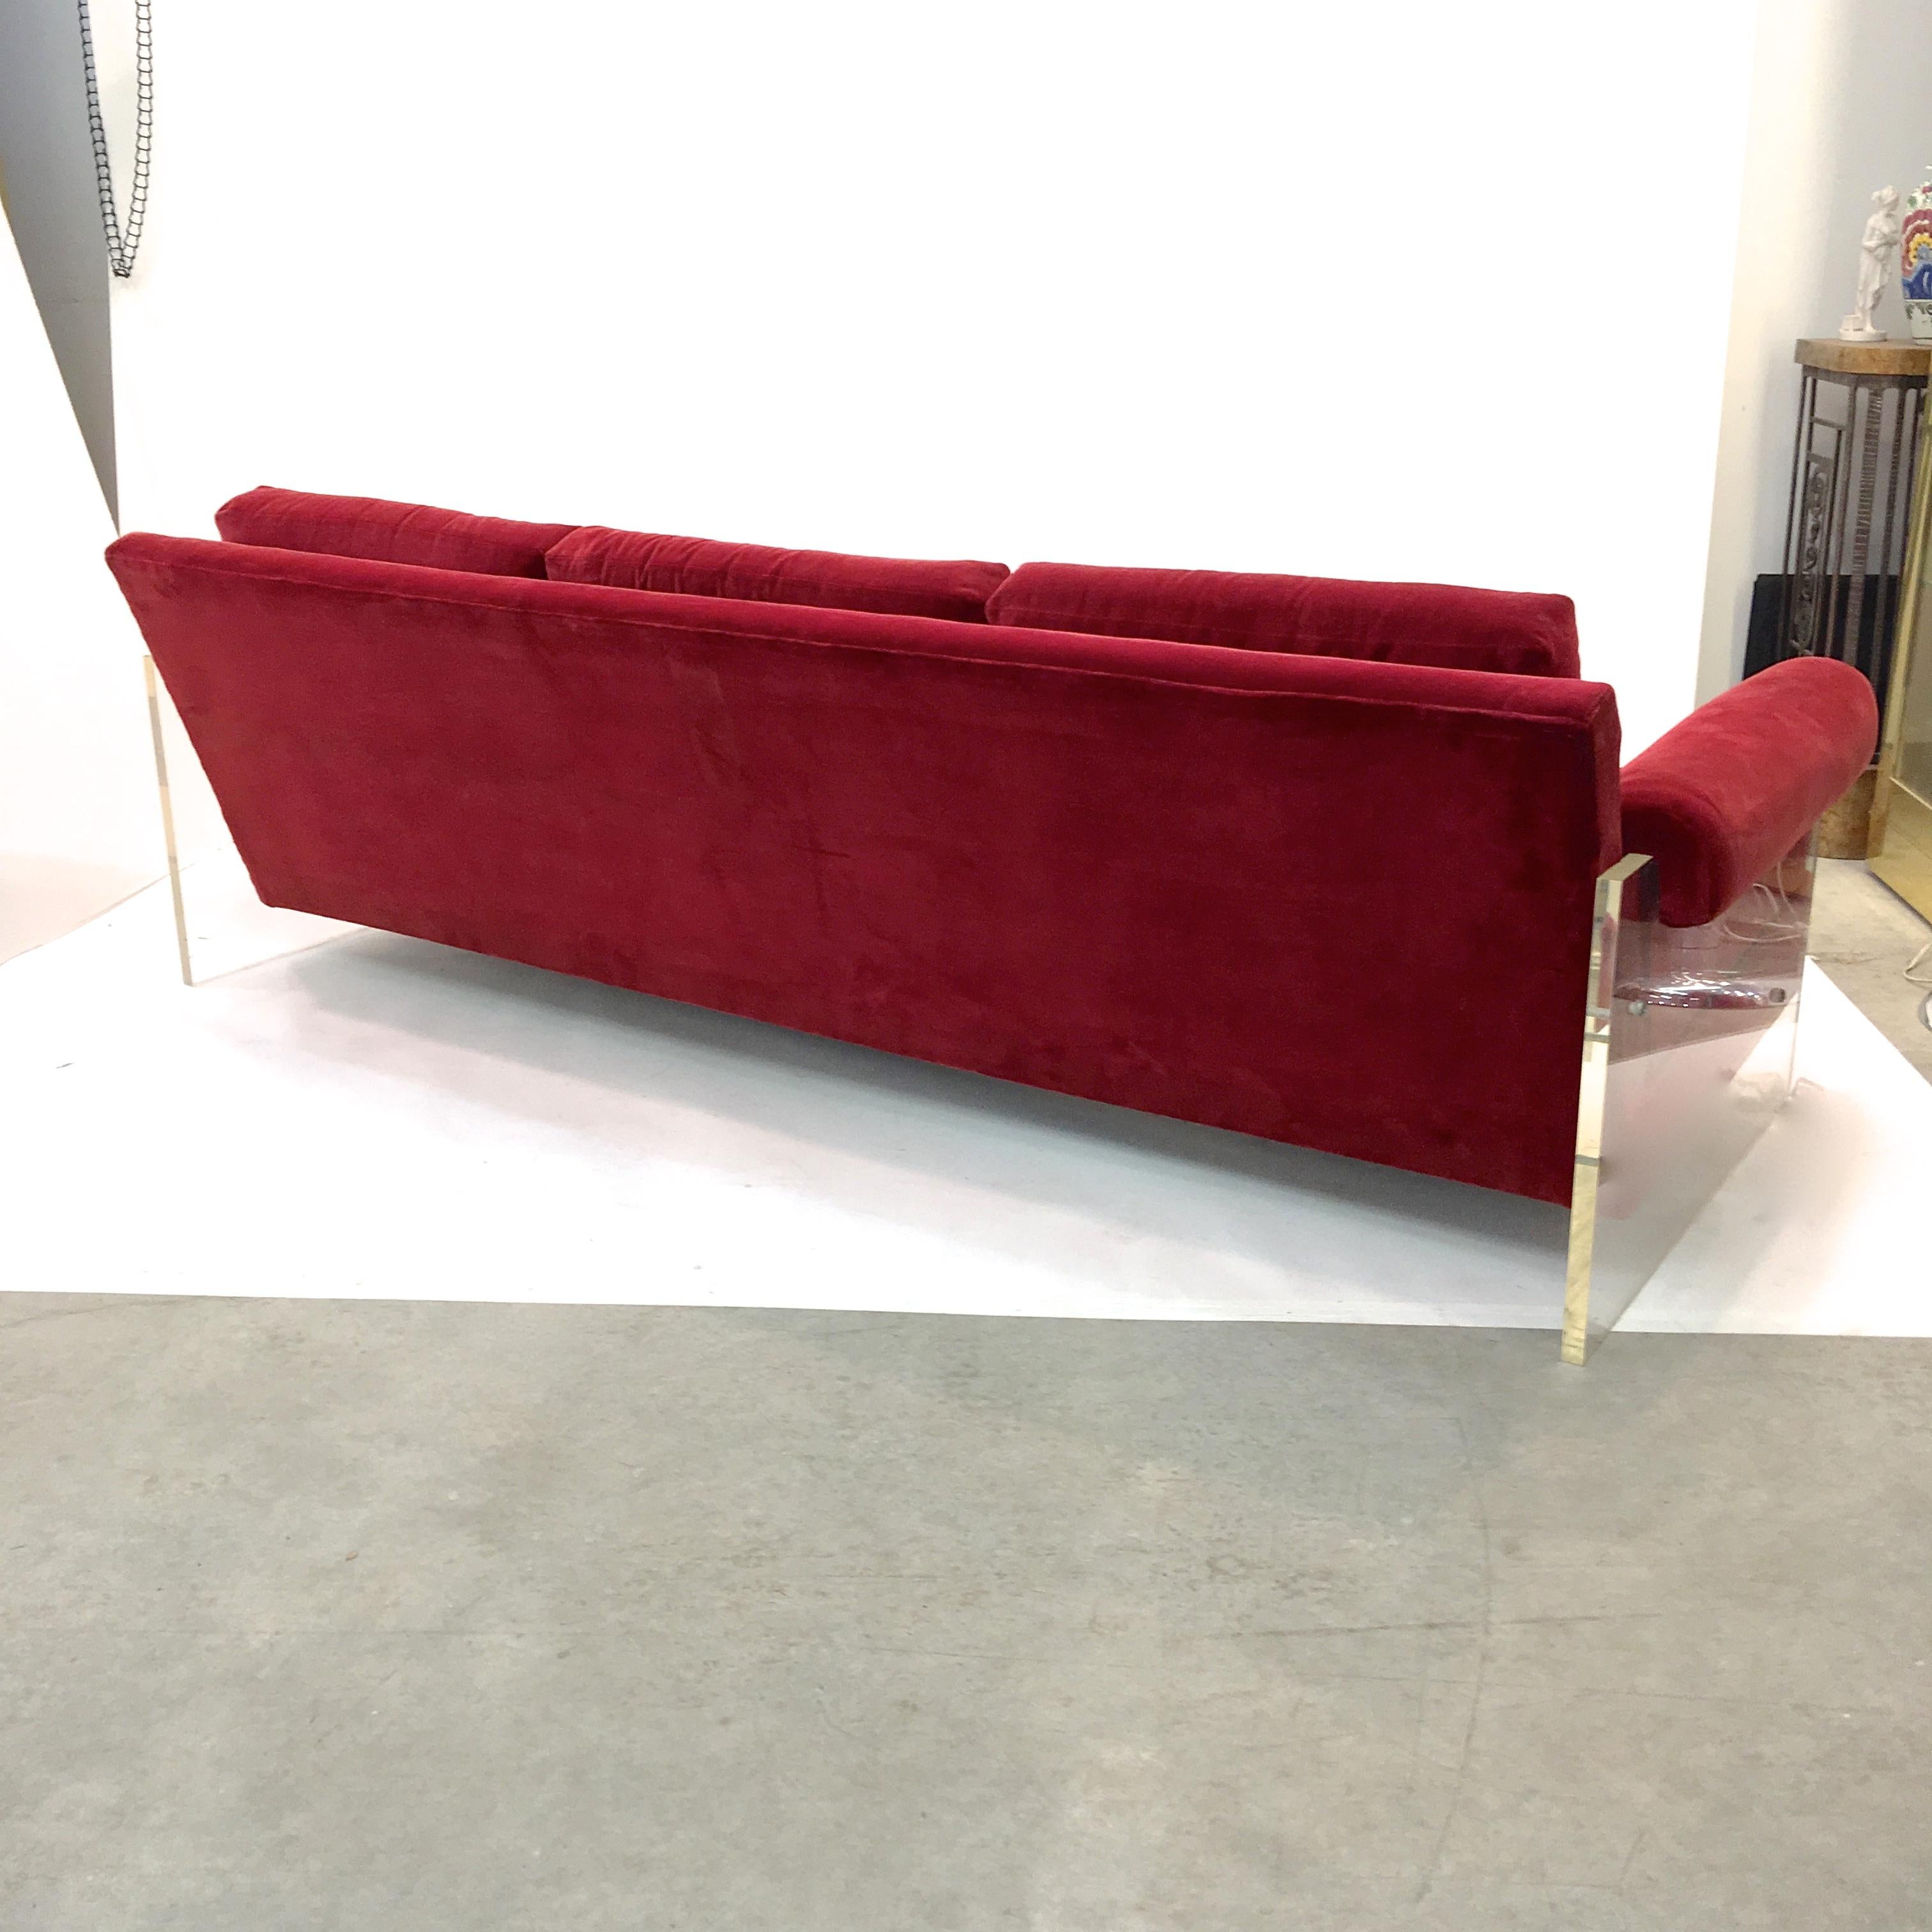 Mid-Century Modern Lucite Sided Sofa by Milo Baughman for Thayer Coggin